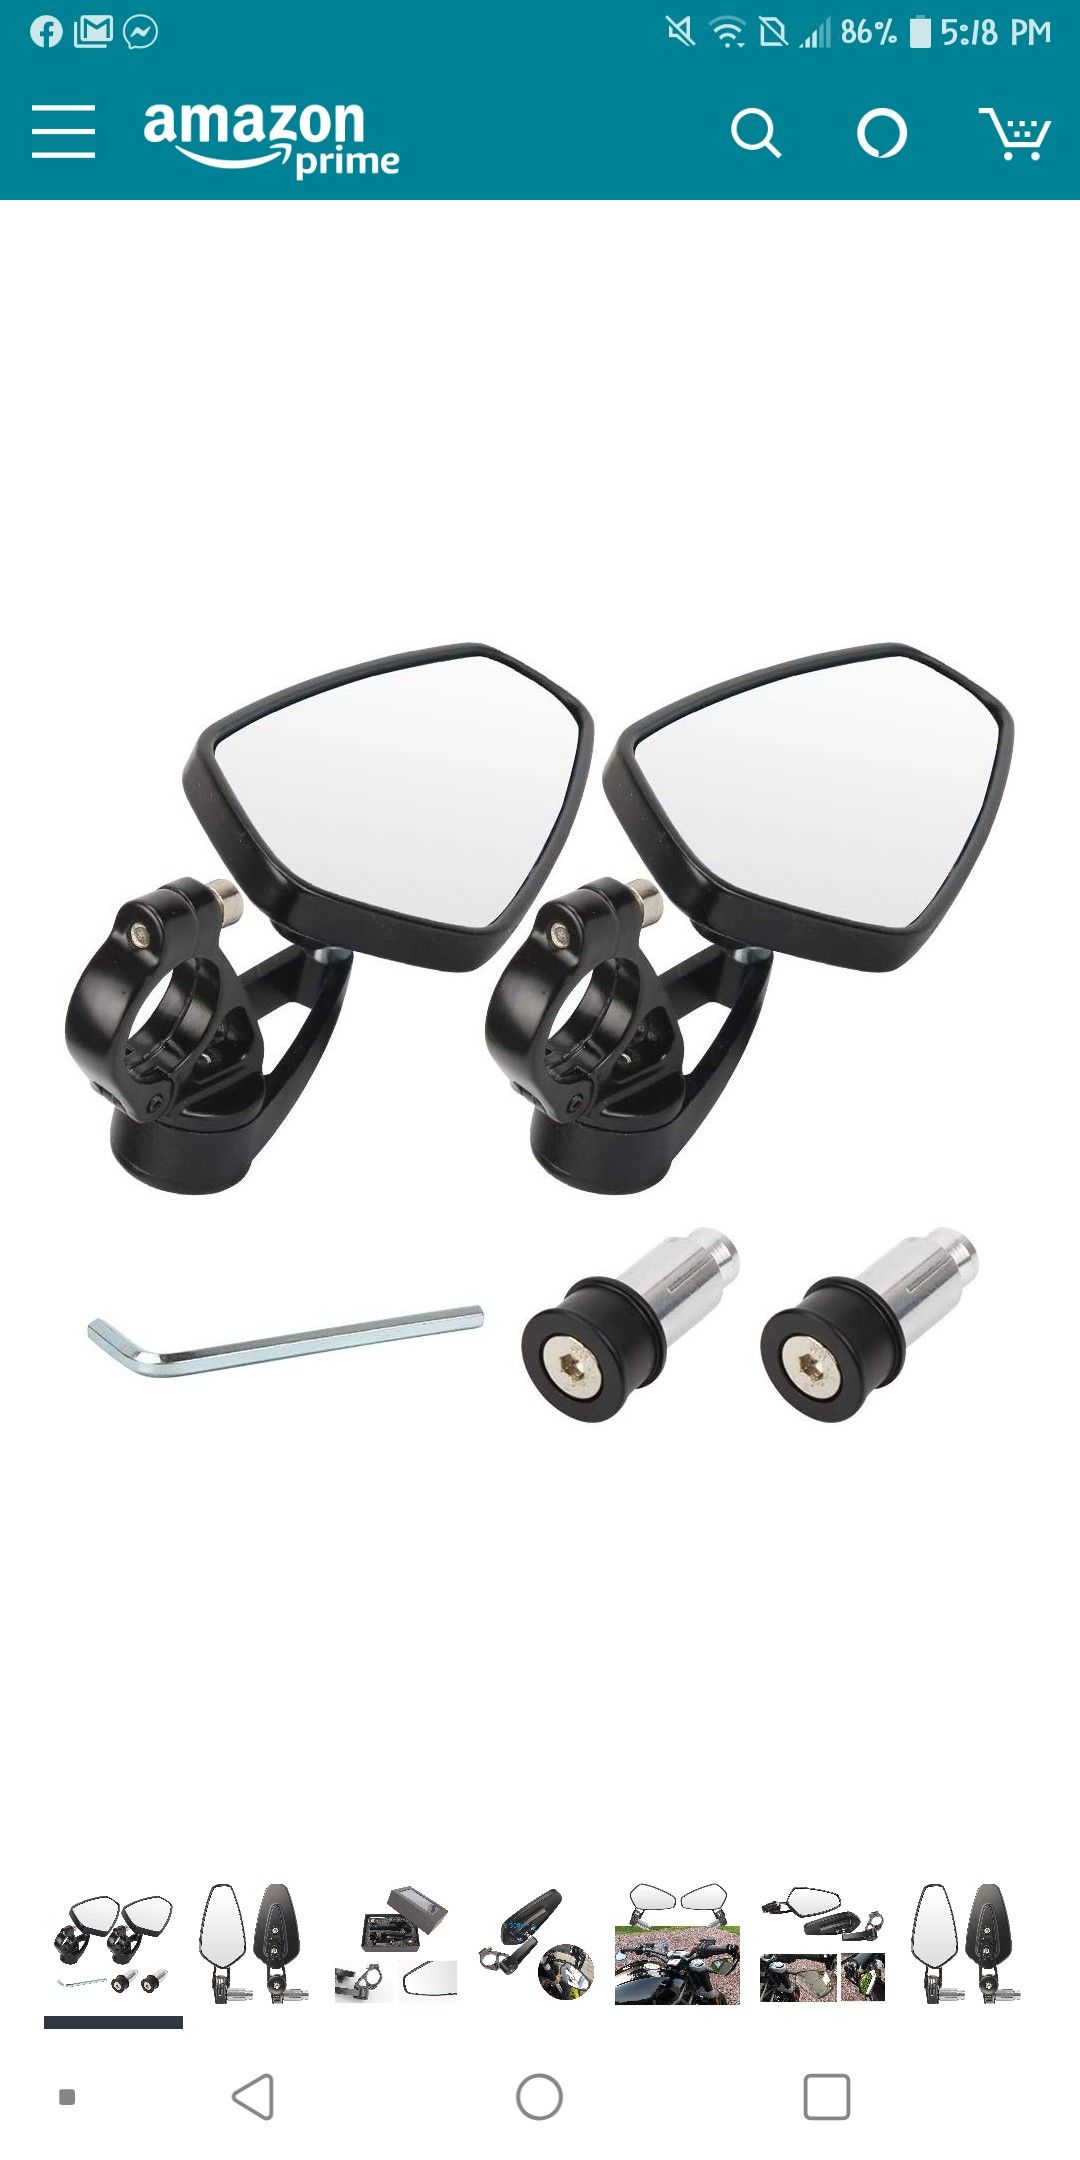 Brand new never used. Motorcycle mirrors